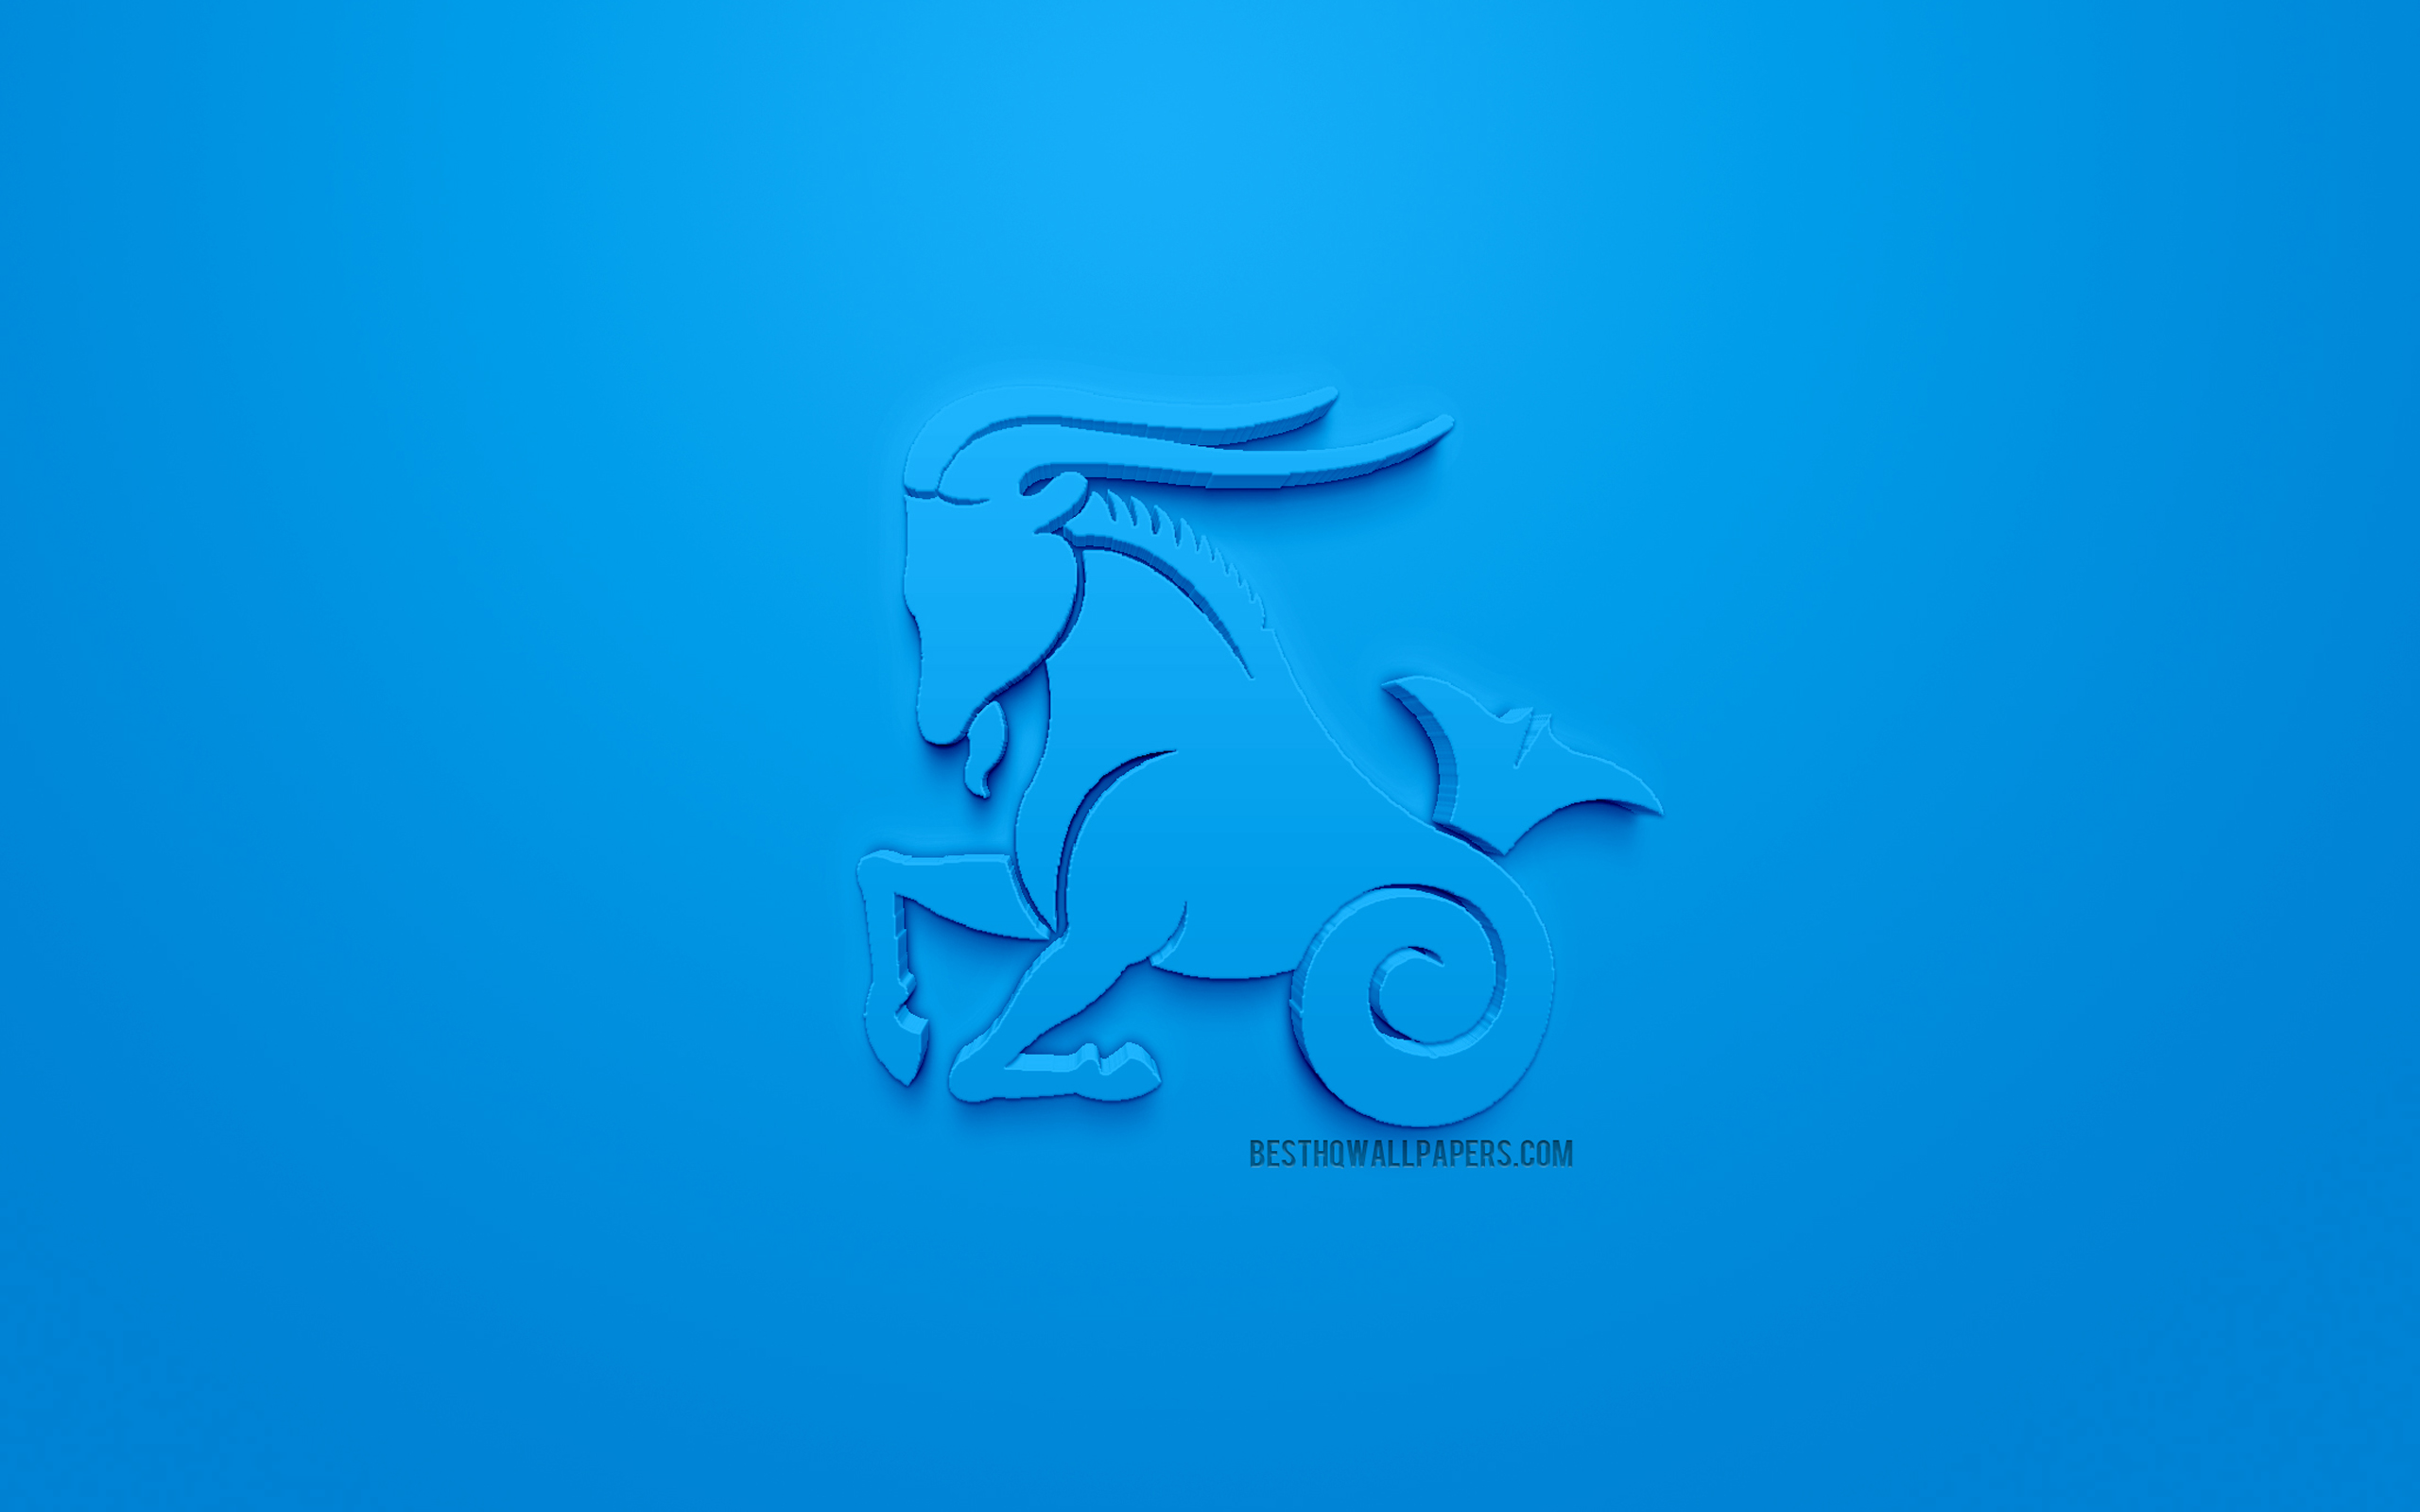 Download wallpaper Capricorn zodiac sign, 3D zodiac signs, astrology, Capricorn, 3D astrological sign, blue background, creative 3D art for desktop with resolution 2560x1600. High Quality HD picture wallpaper